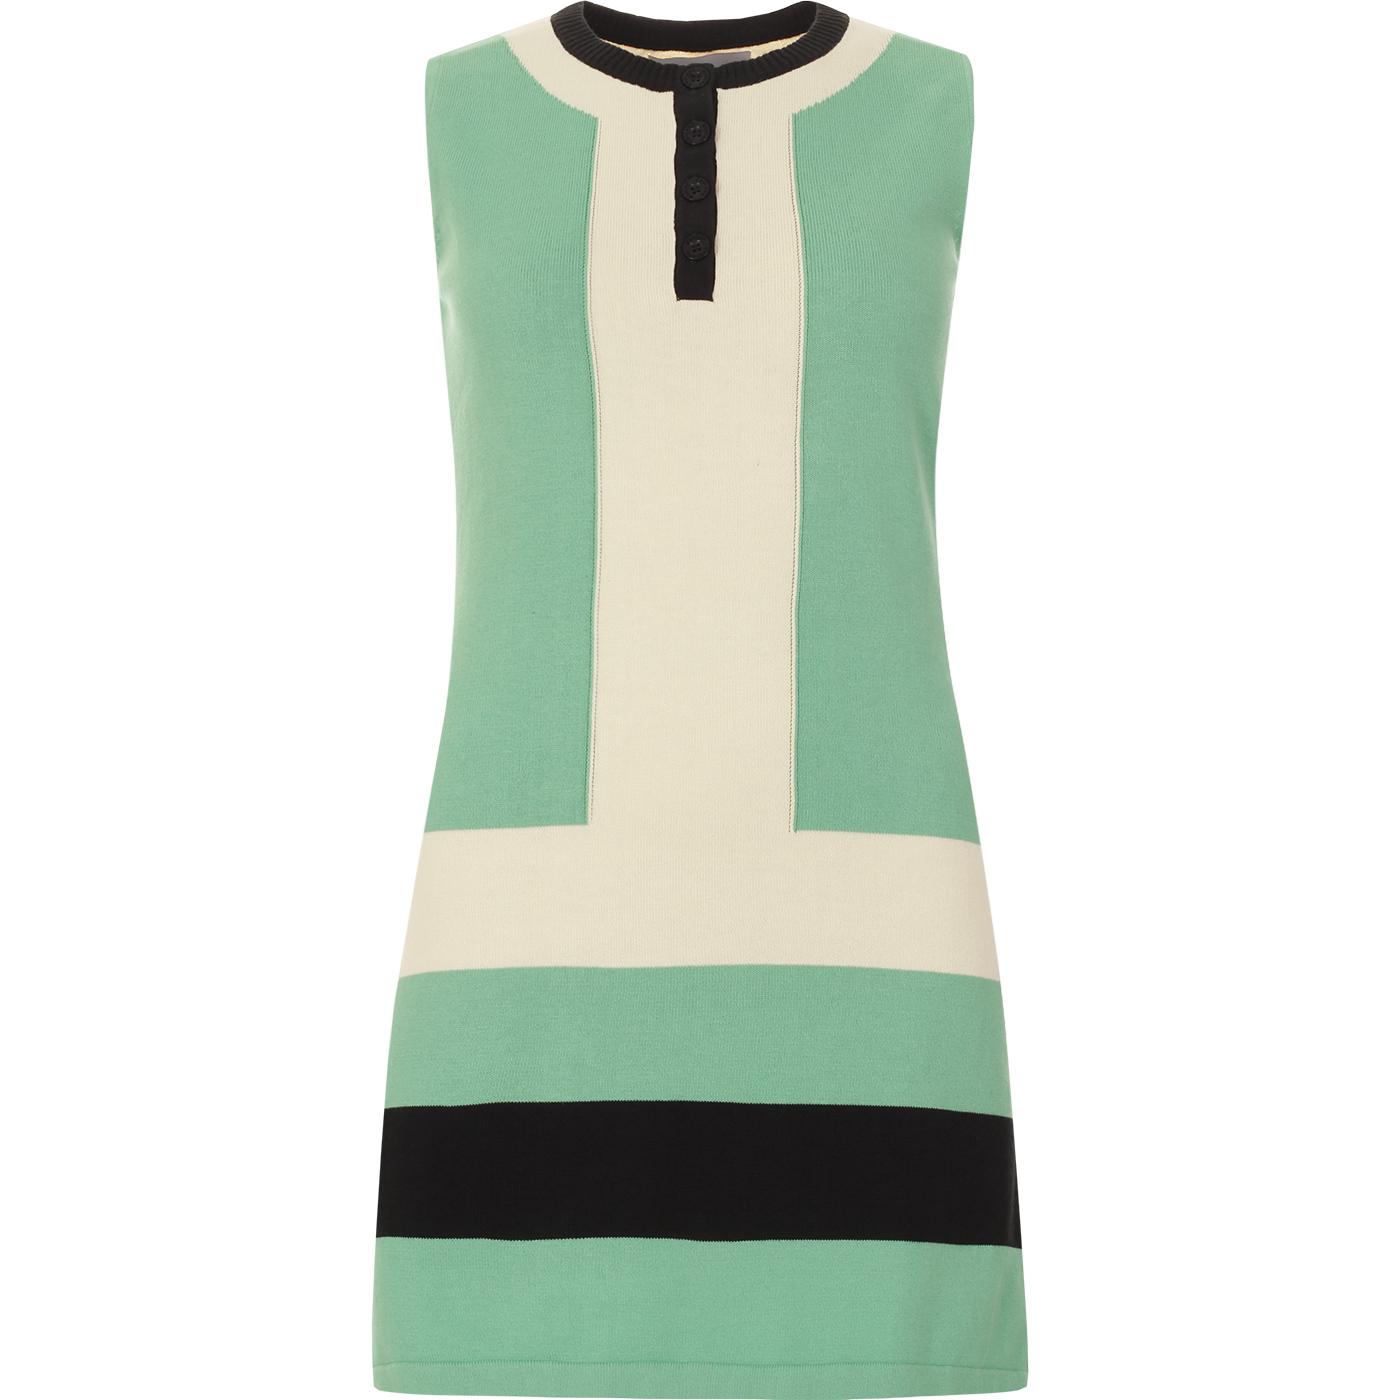 Madcap England Retro Mod 1960s Knitted Panel Henley Dress in Katydid Green